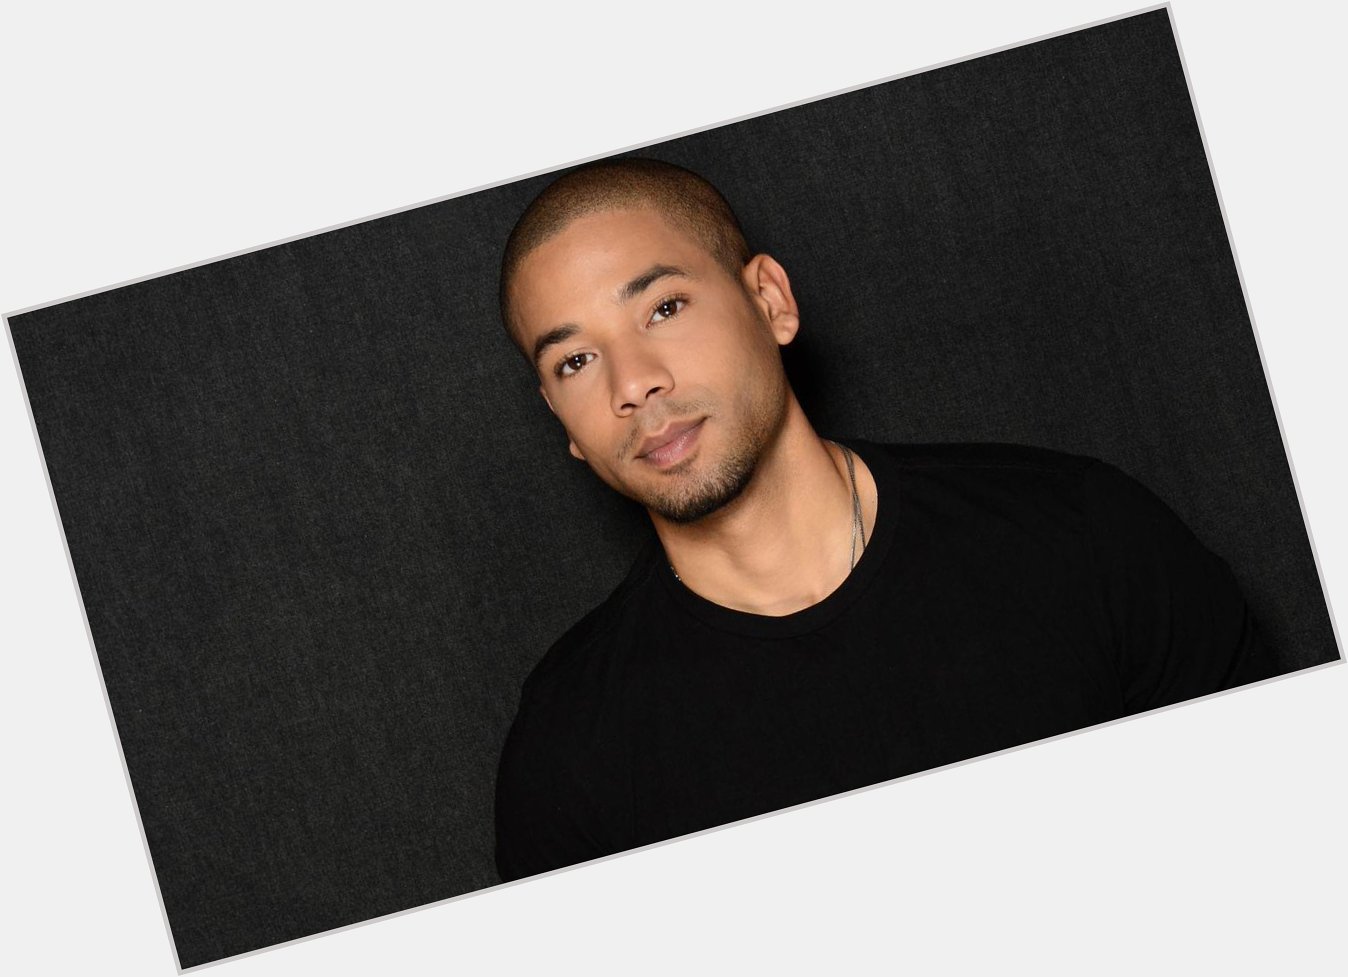   would like to wish Jussie Smollett, a very happy birthday.  